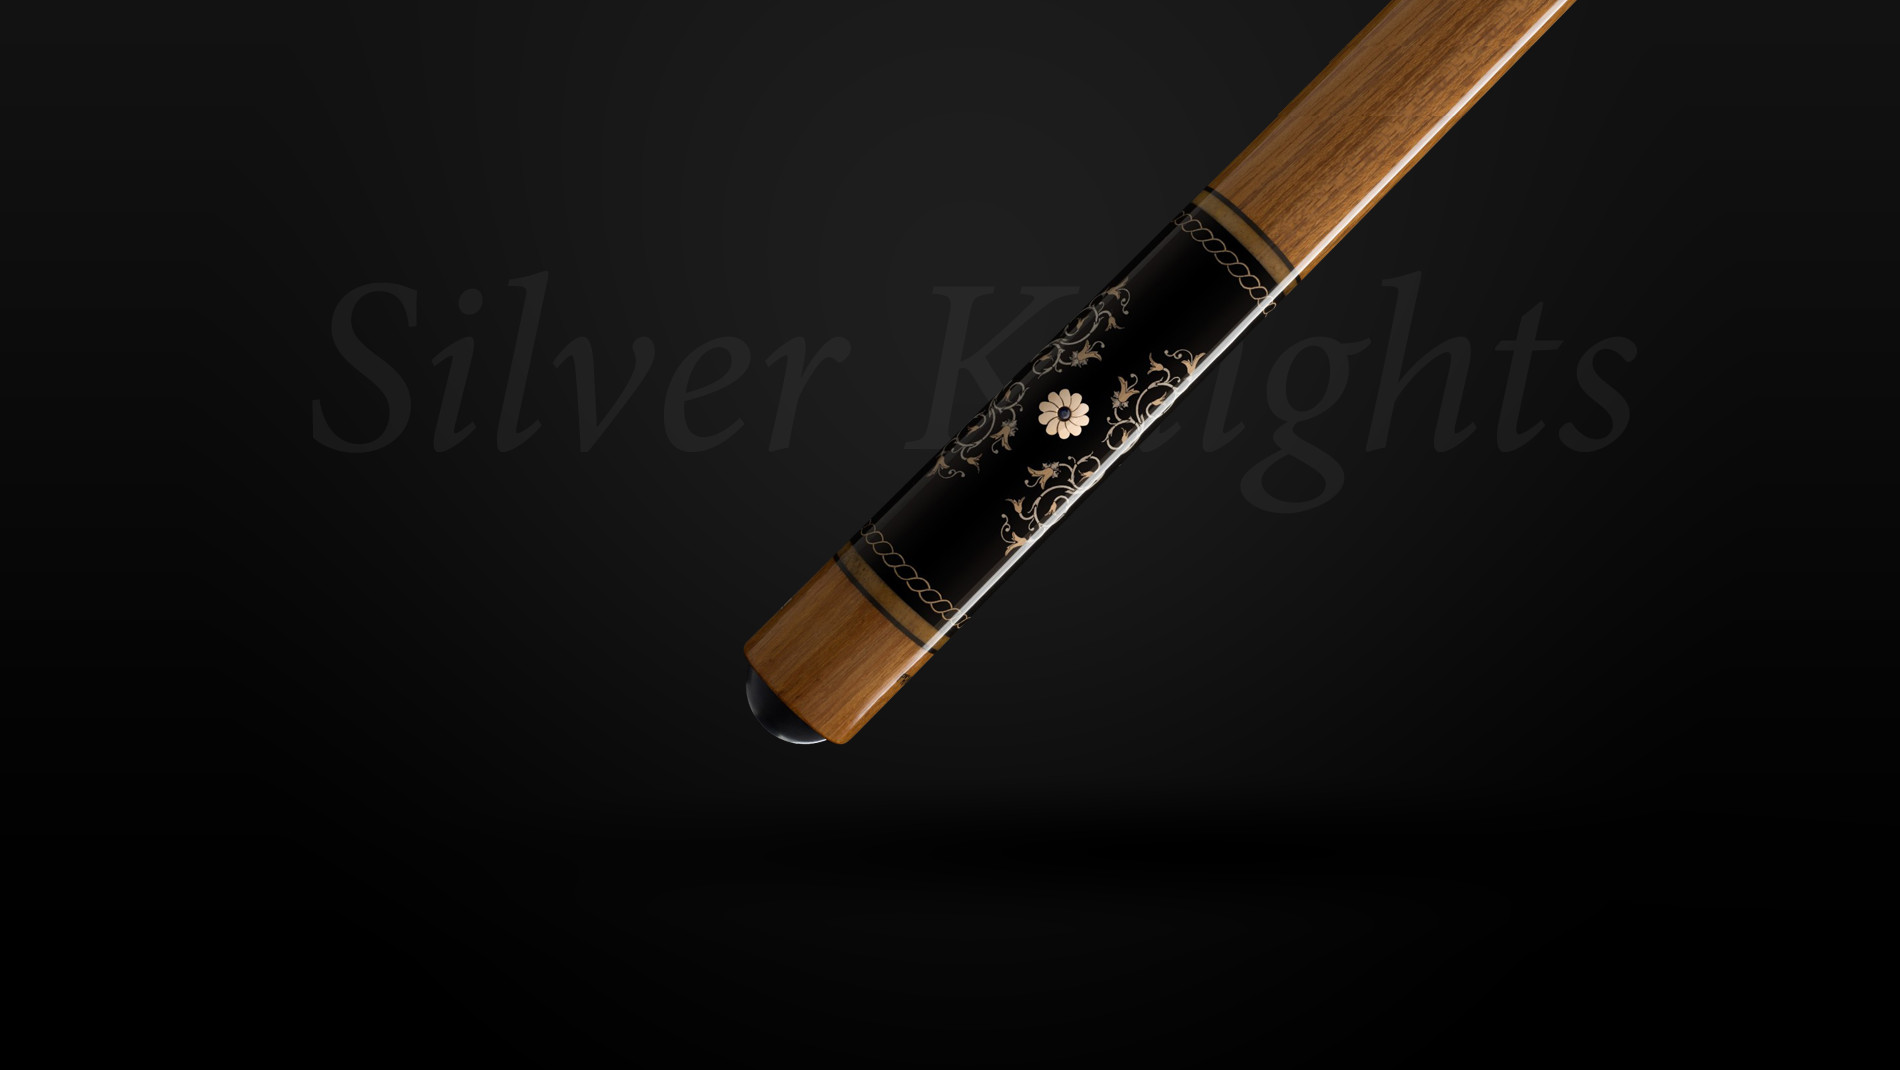 Detail of the Silver Knights custom cue